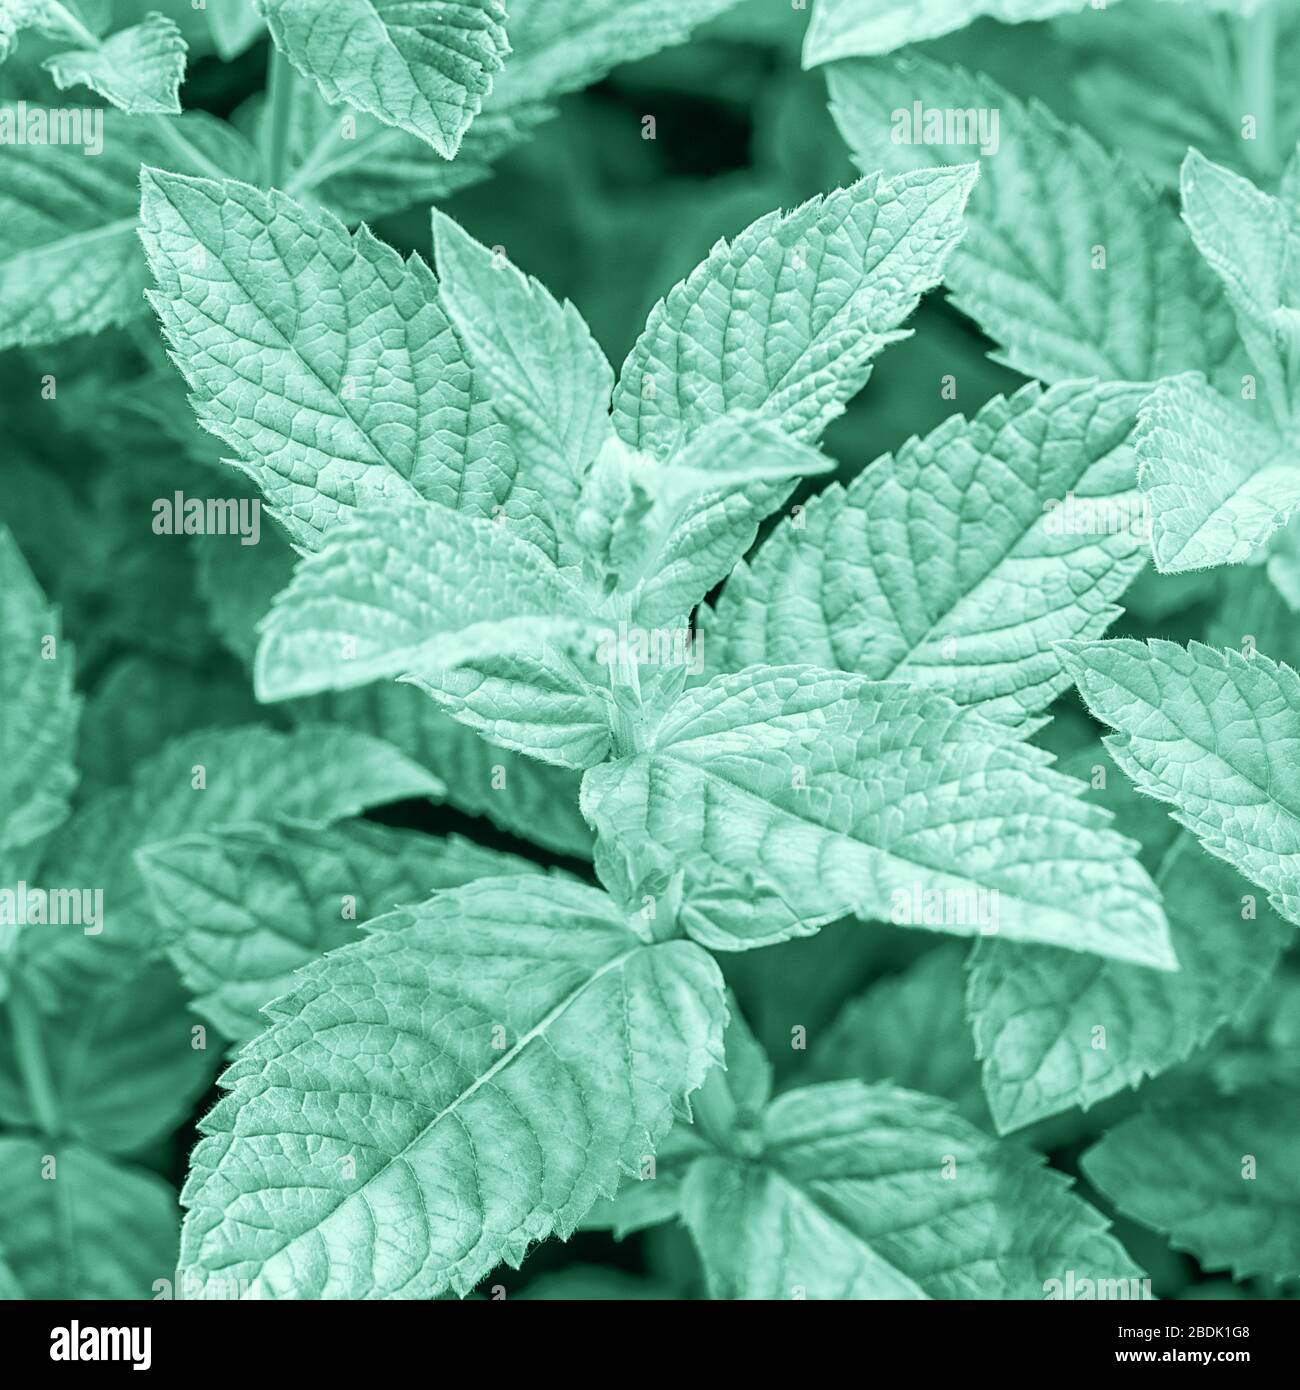 Color trend 2020 year neo mint. Flat lay fresh mint leaves toned in light neo mint green color , close up. Stock Photo